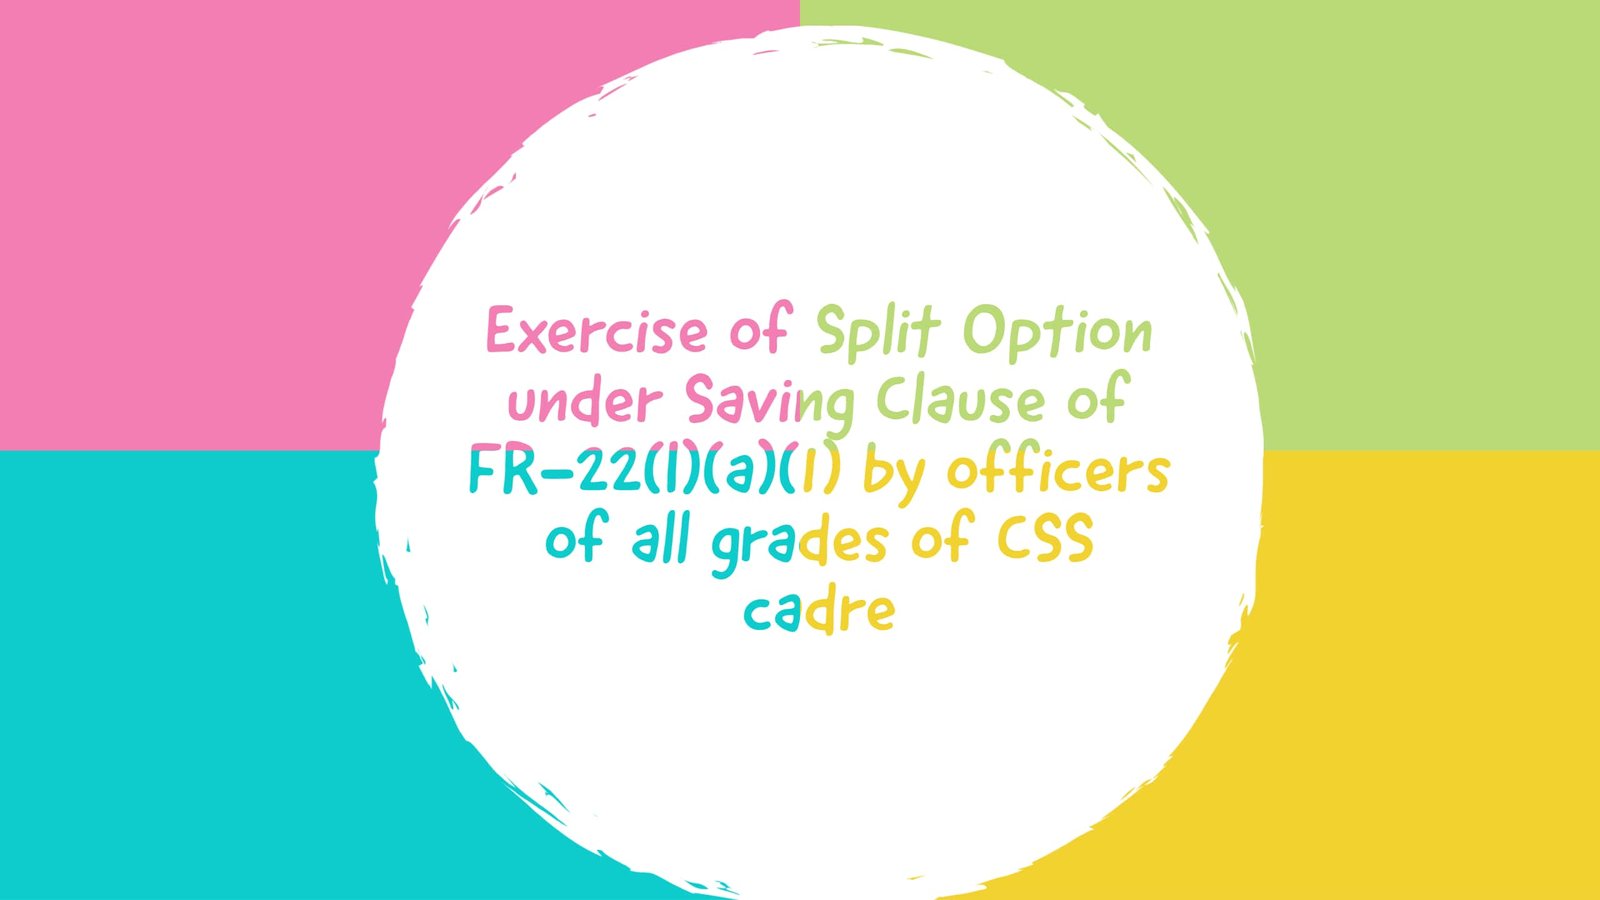 Exercise of Split Option under Saving Clause of FR-22(I)(a)(1) by officers of all grades of CSS cadre